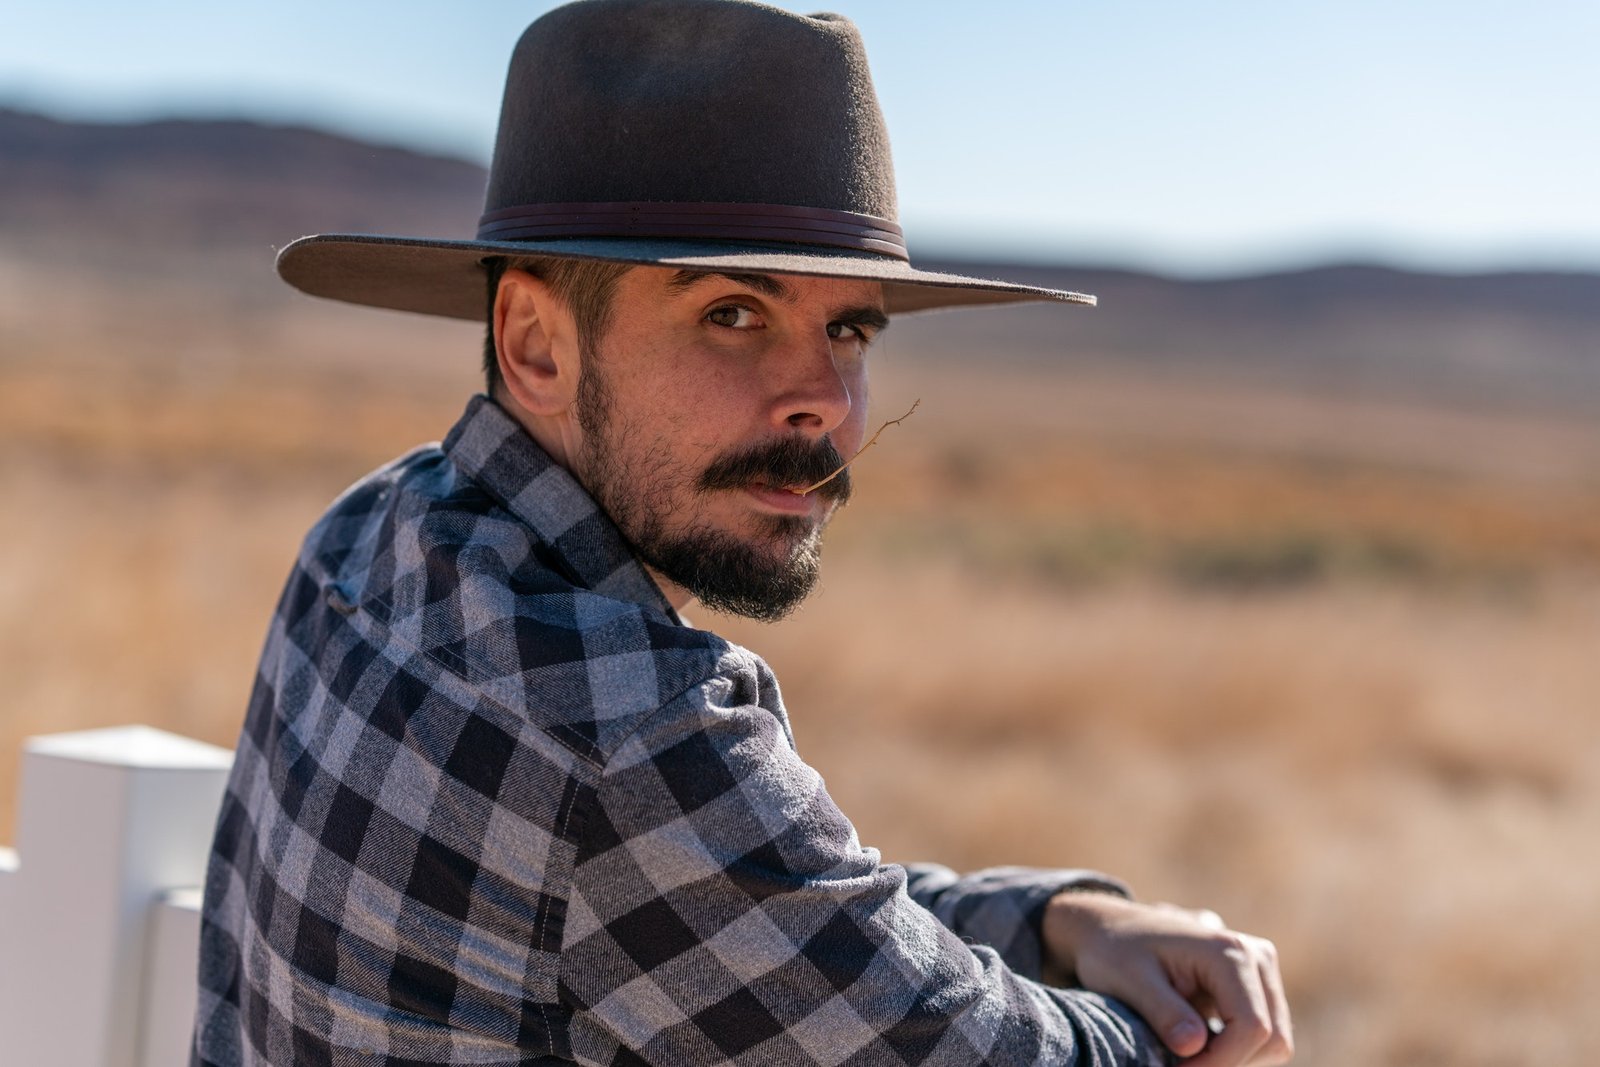 Cowboy with grey hat, moustache and checked shirt